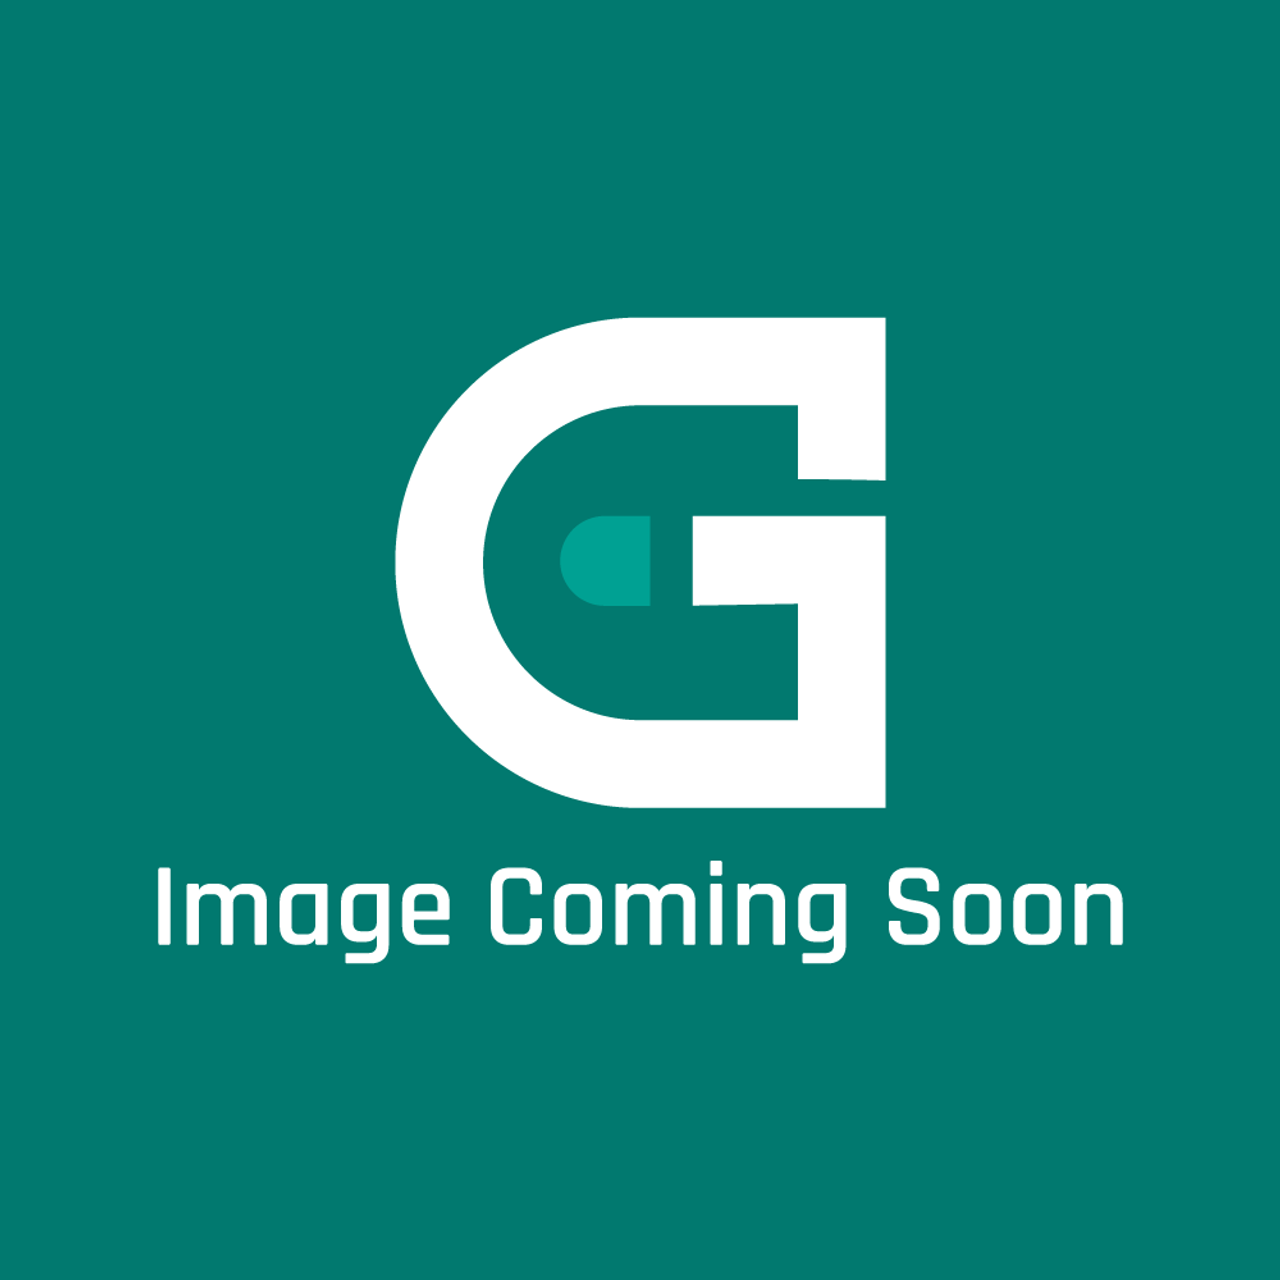 Frigidaire - Electrolux 316576624 Controller - Image Coming Soon!